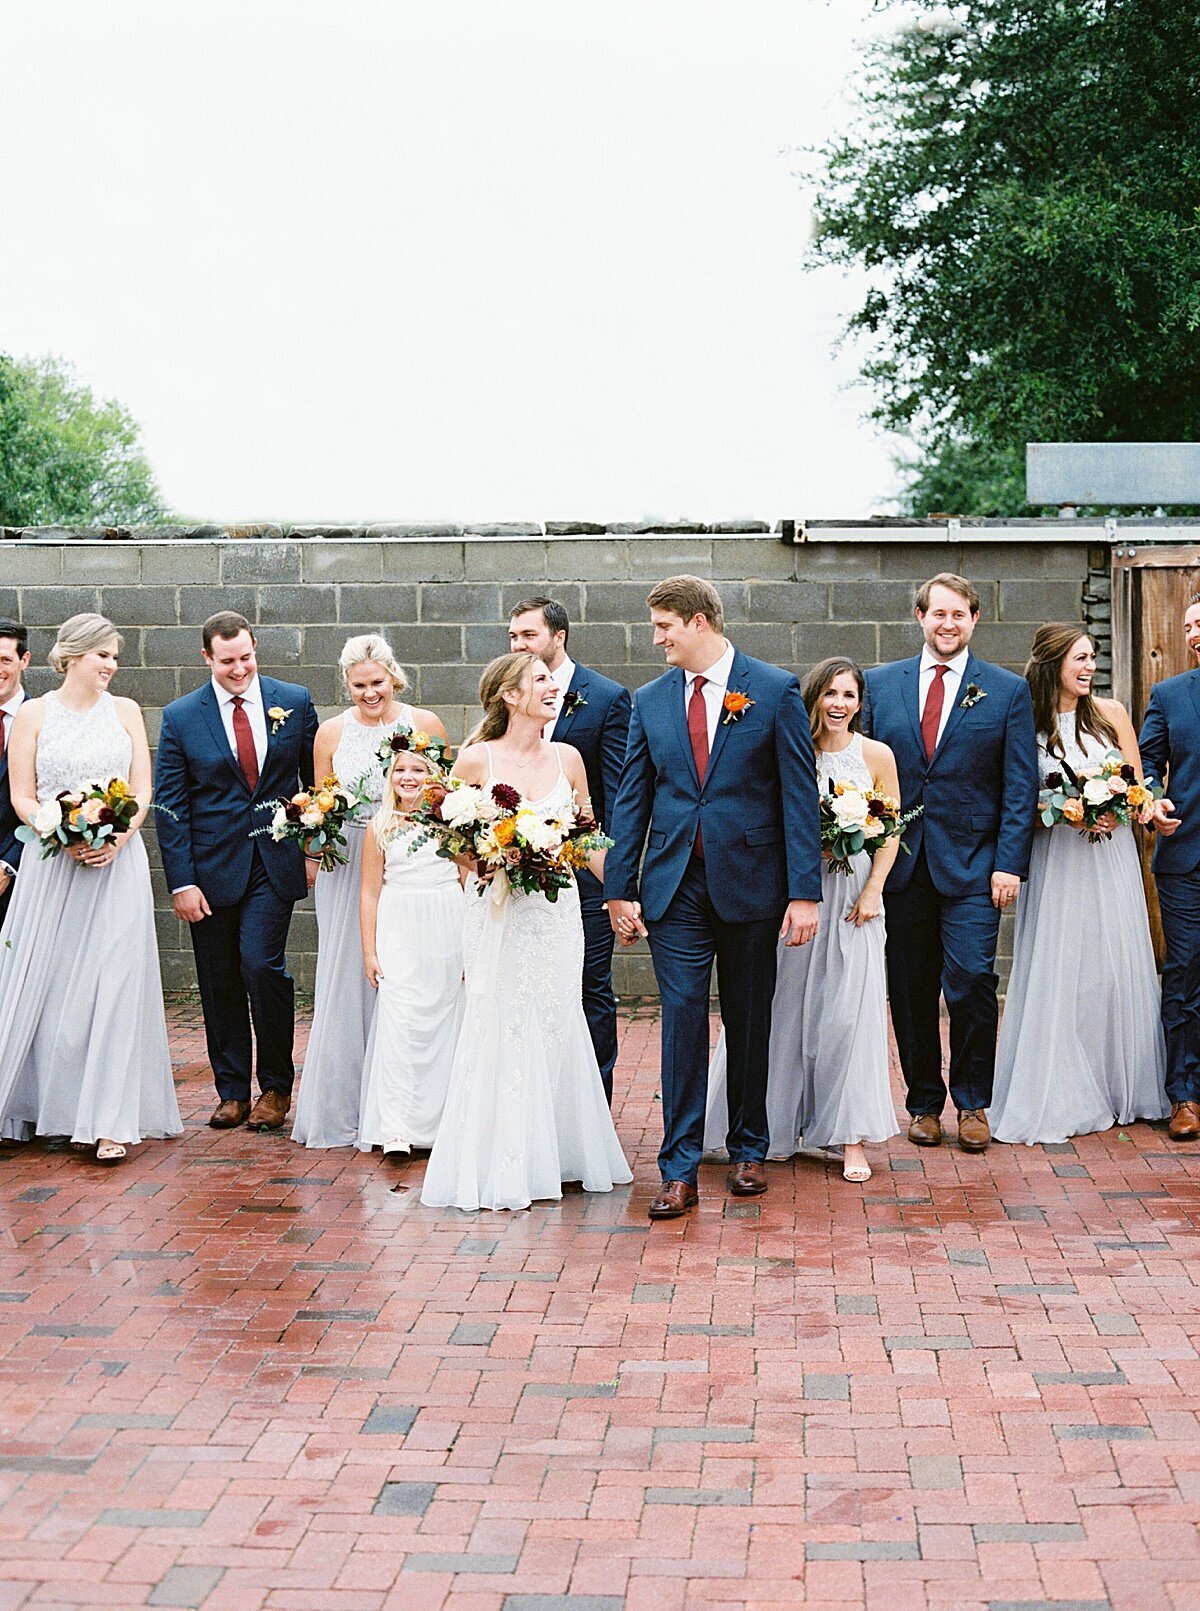 Wedding Party at Mopac Events | Florals by Vella Nest Floral Design, Fort Worth Wedding Florist